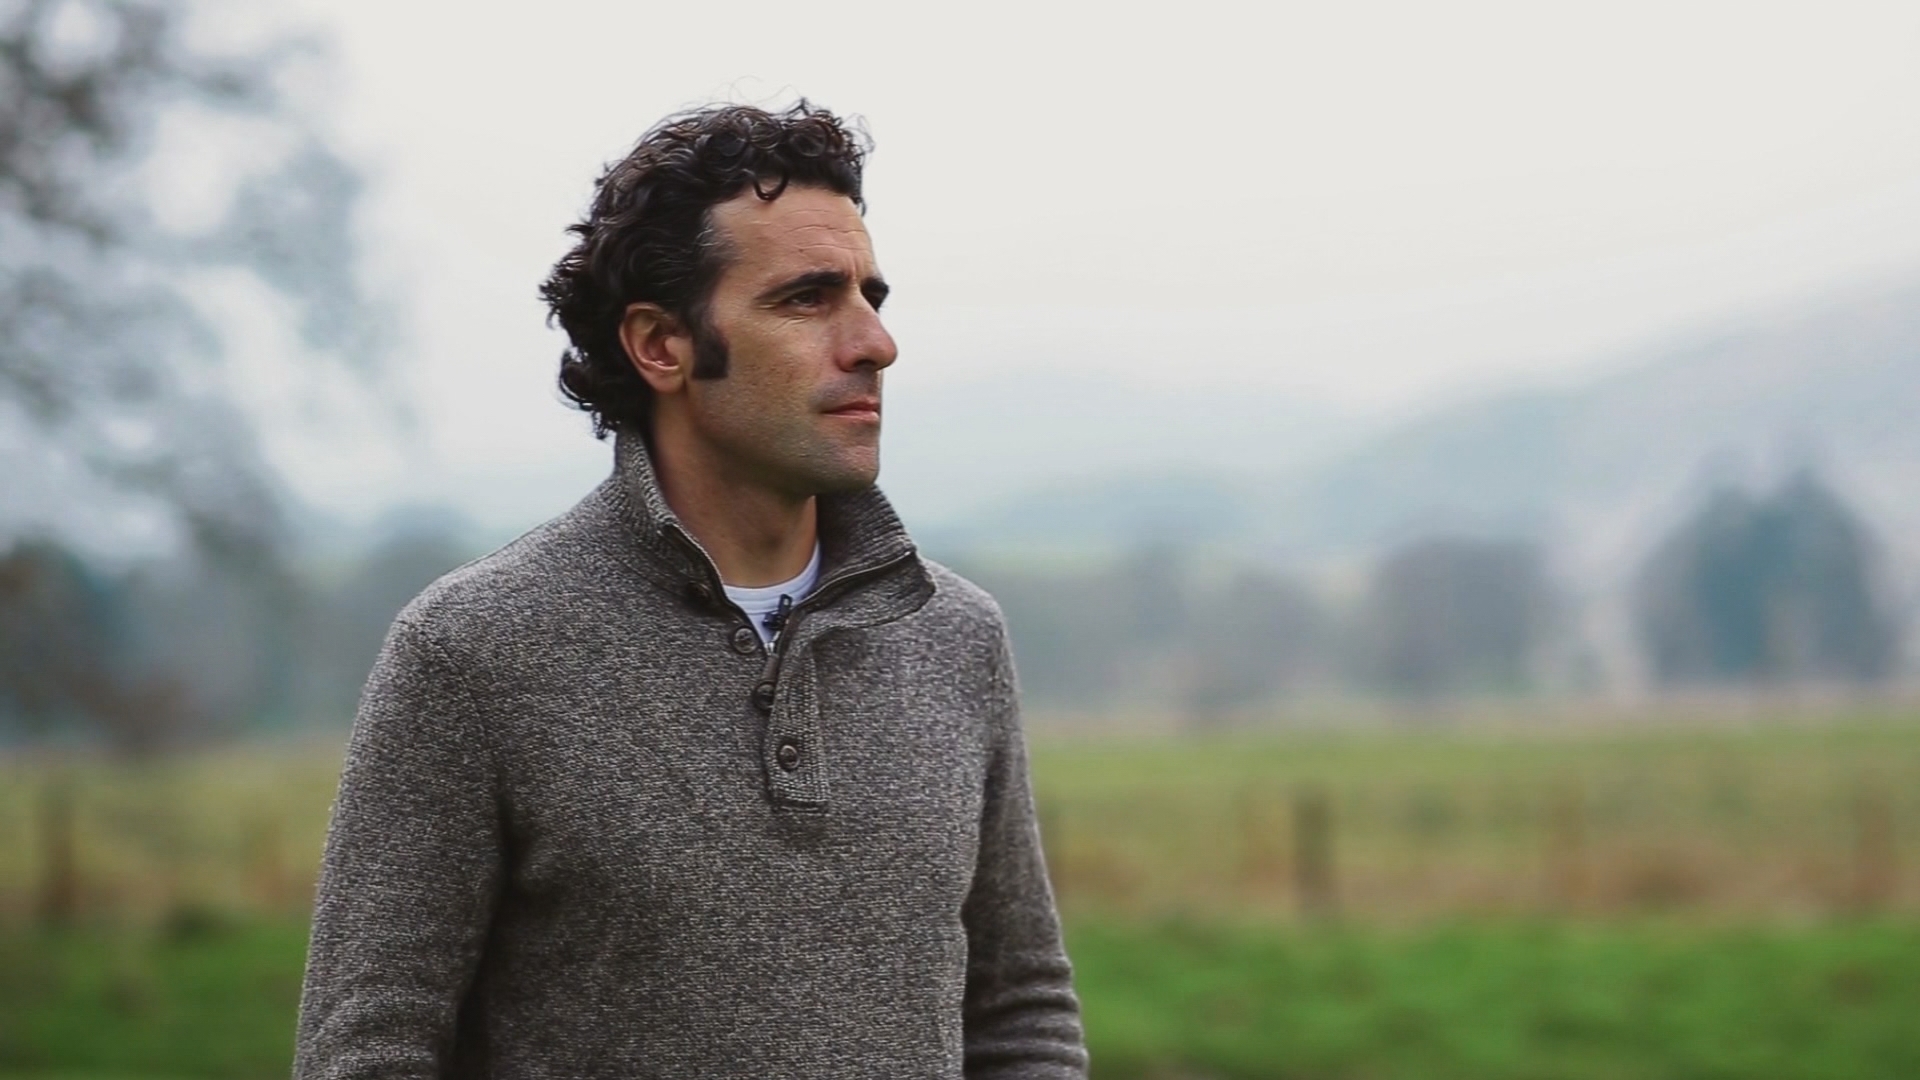 13News Sports Director traveled to Scotland to visit 3 time Indy 500 champion Dario Franchitti shortly after his medical retirement.